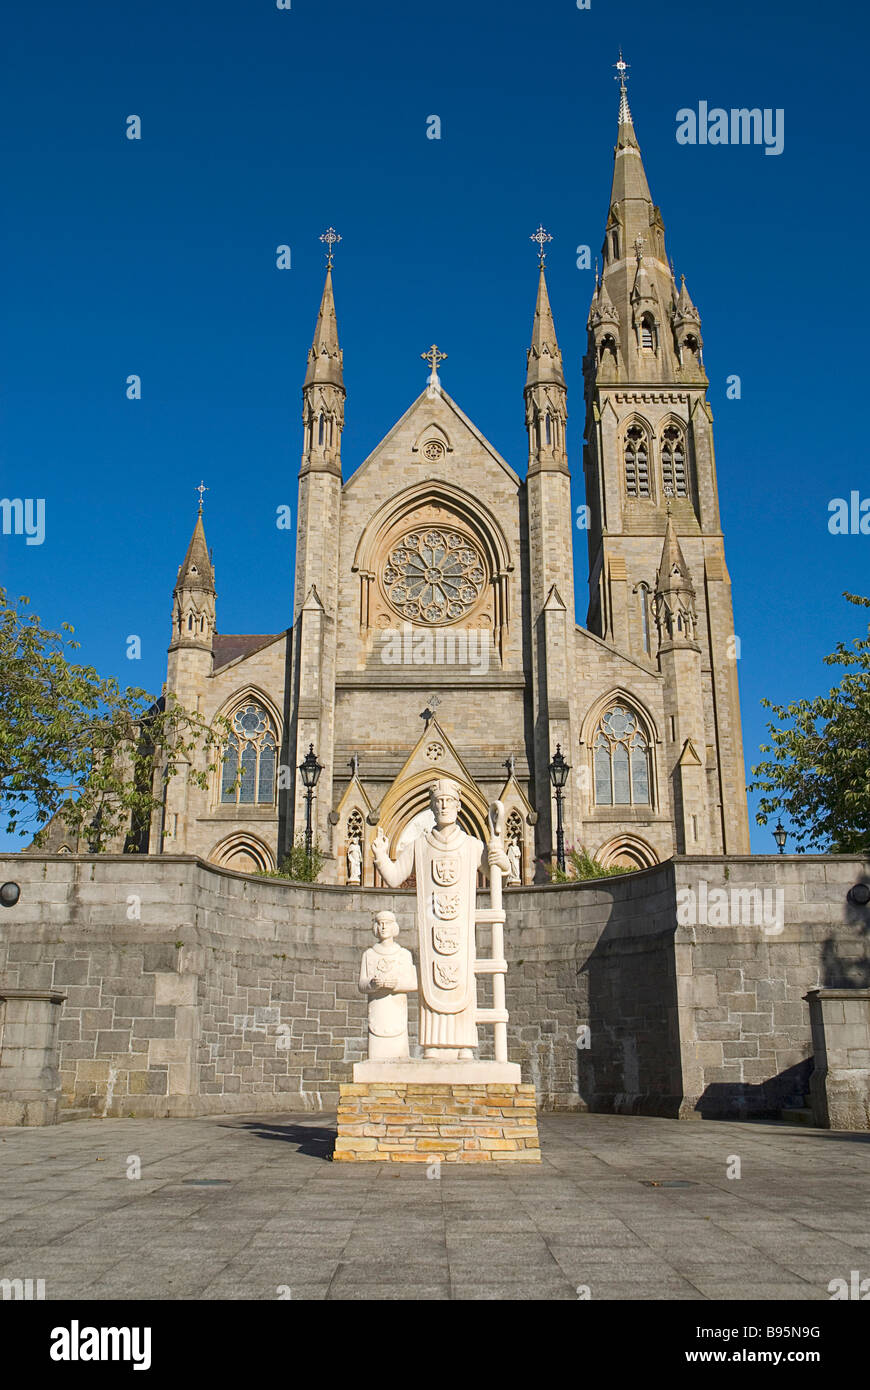 Ireland, County Monaghan, Monaghan Town. St Macartans Cathedral with statue of Saints Macartan and Patrick in foreground. Stock Photo